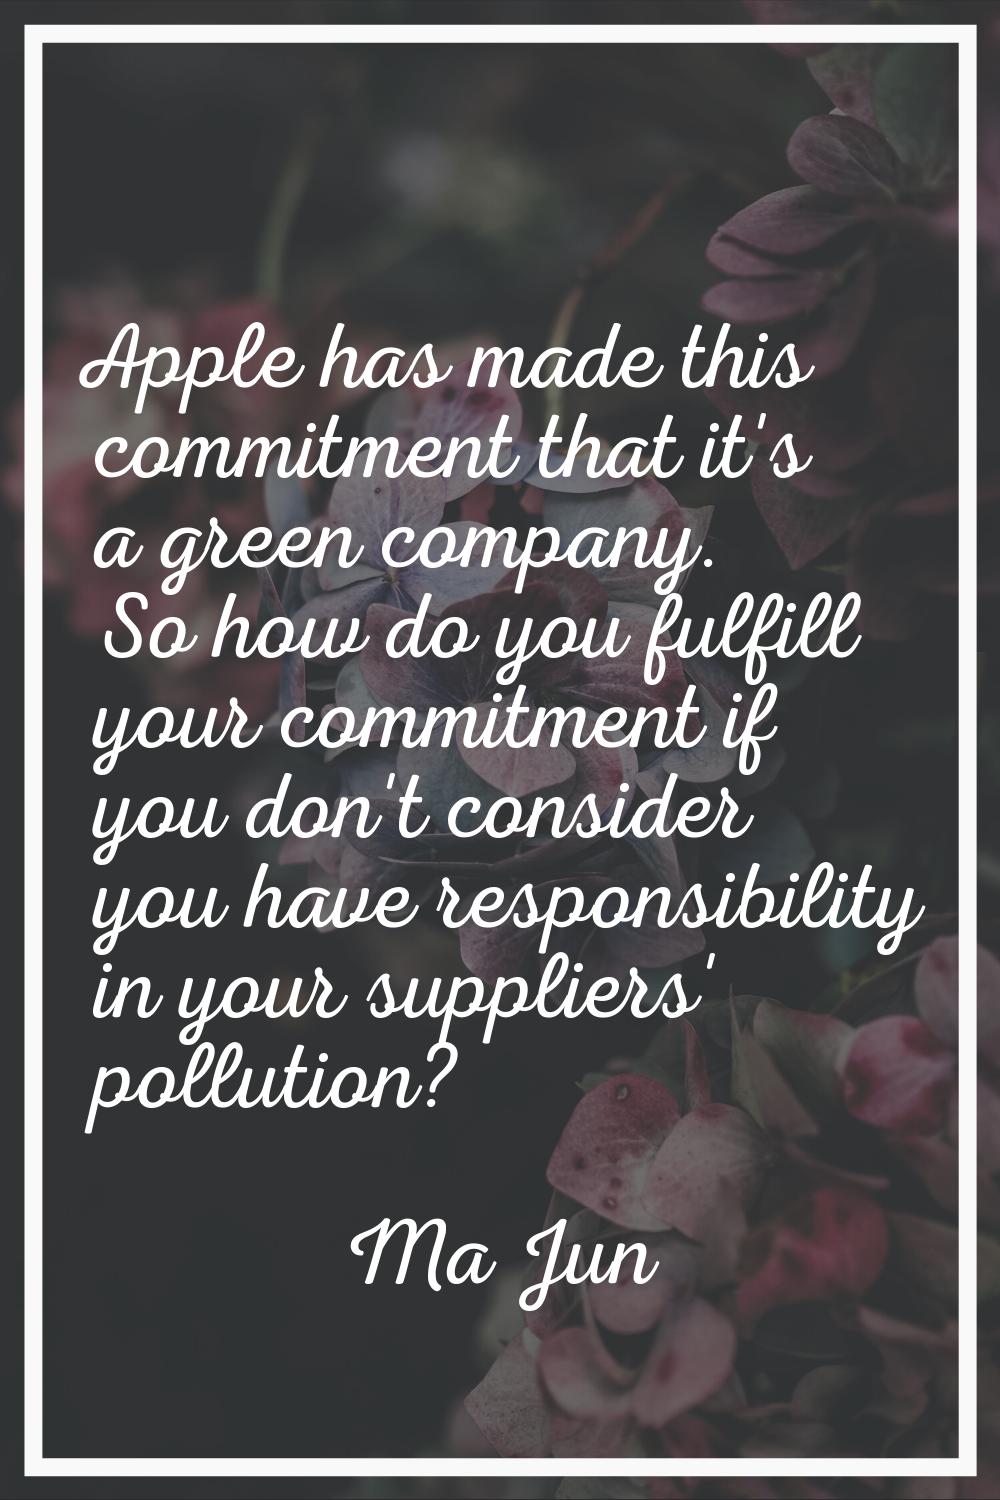 Apple has made this commitment that it's a green company. So how do you fulfill your commitment if 